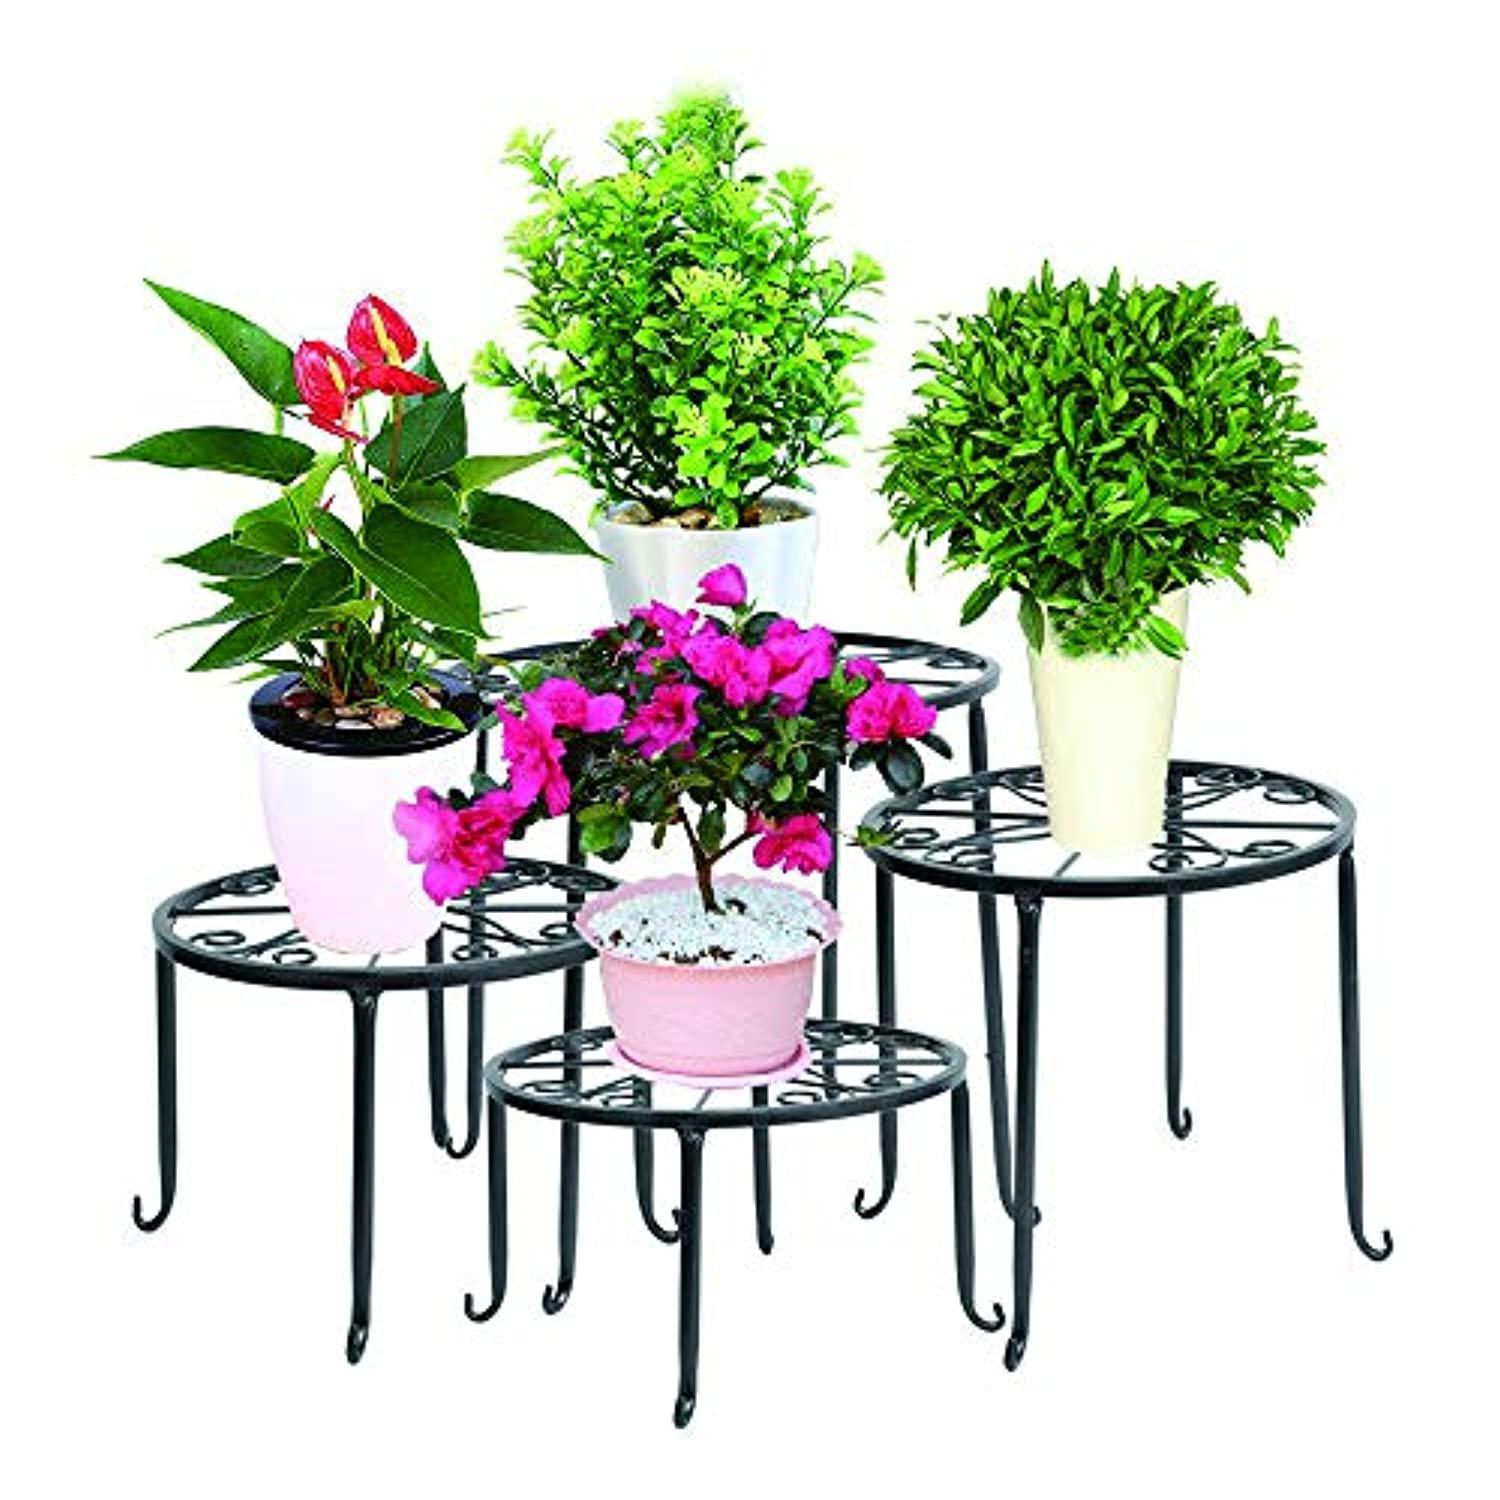 ZOVENCHI metal plant stand 4 in 1, wrought iron planter holder floor flower pot round rack for home garden patio